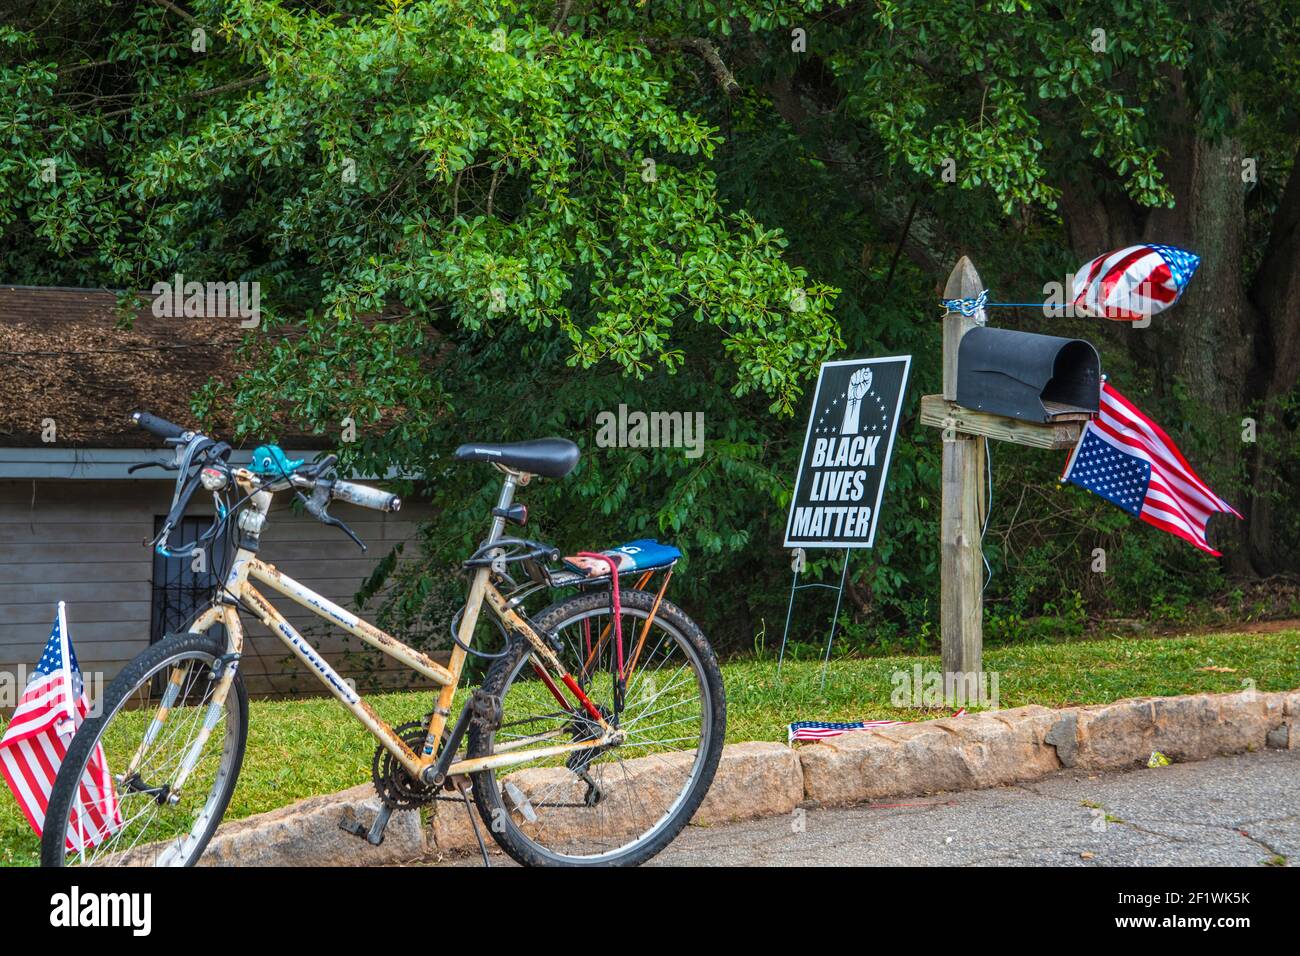 Doraville, Ga / USA - 07 06 20: Black Lives Matter yard sign, a bicycle and an American flag Stock Photo